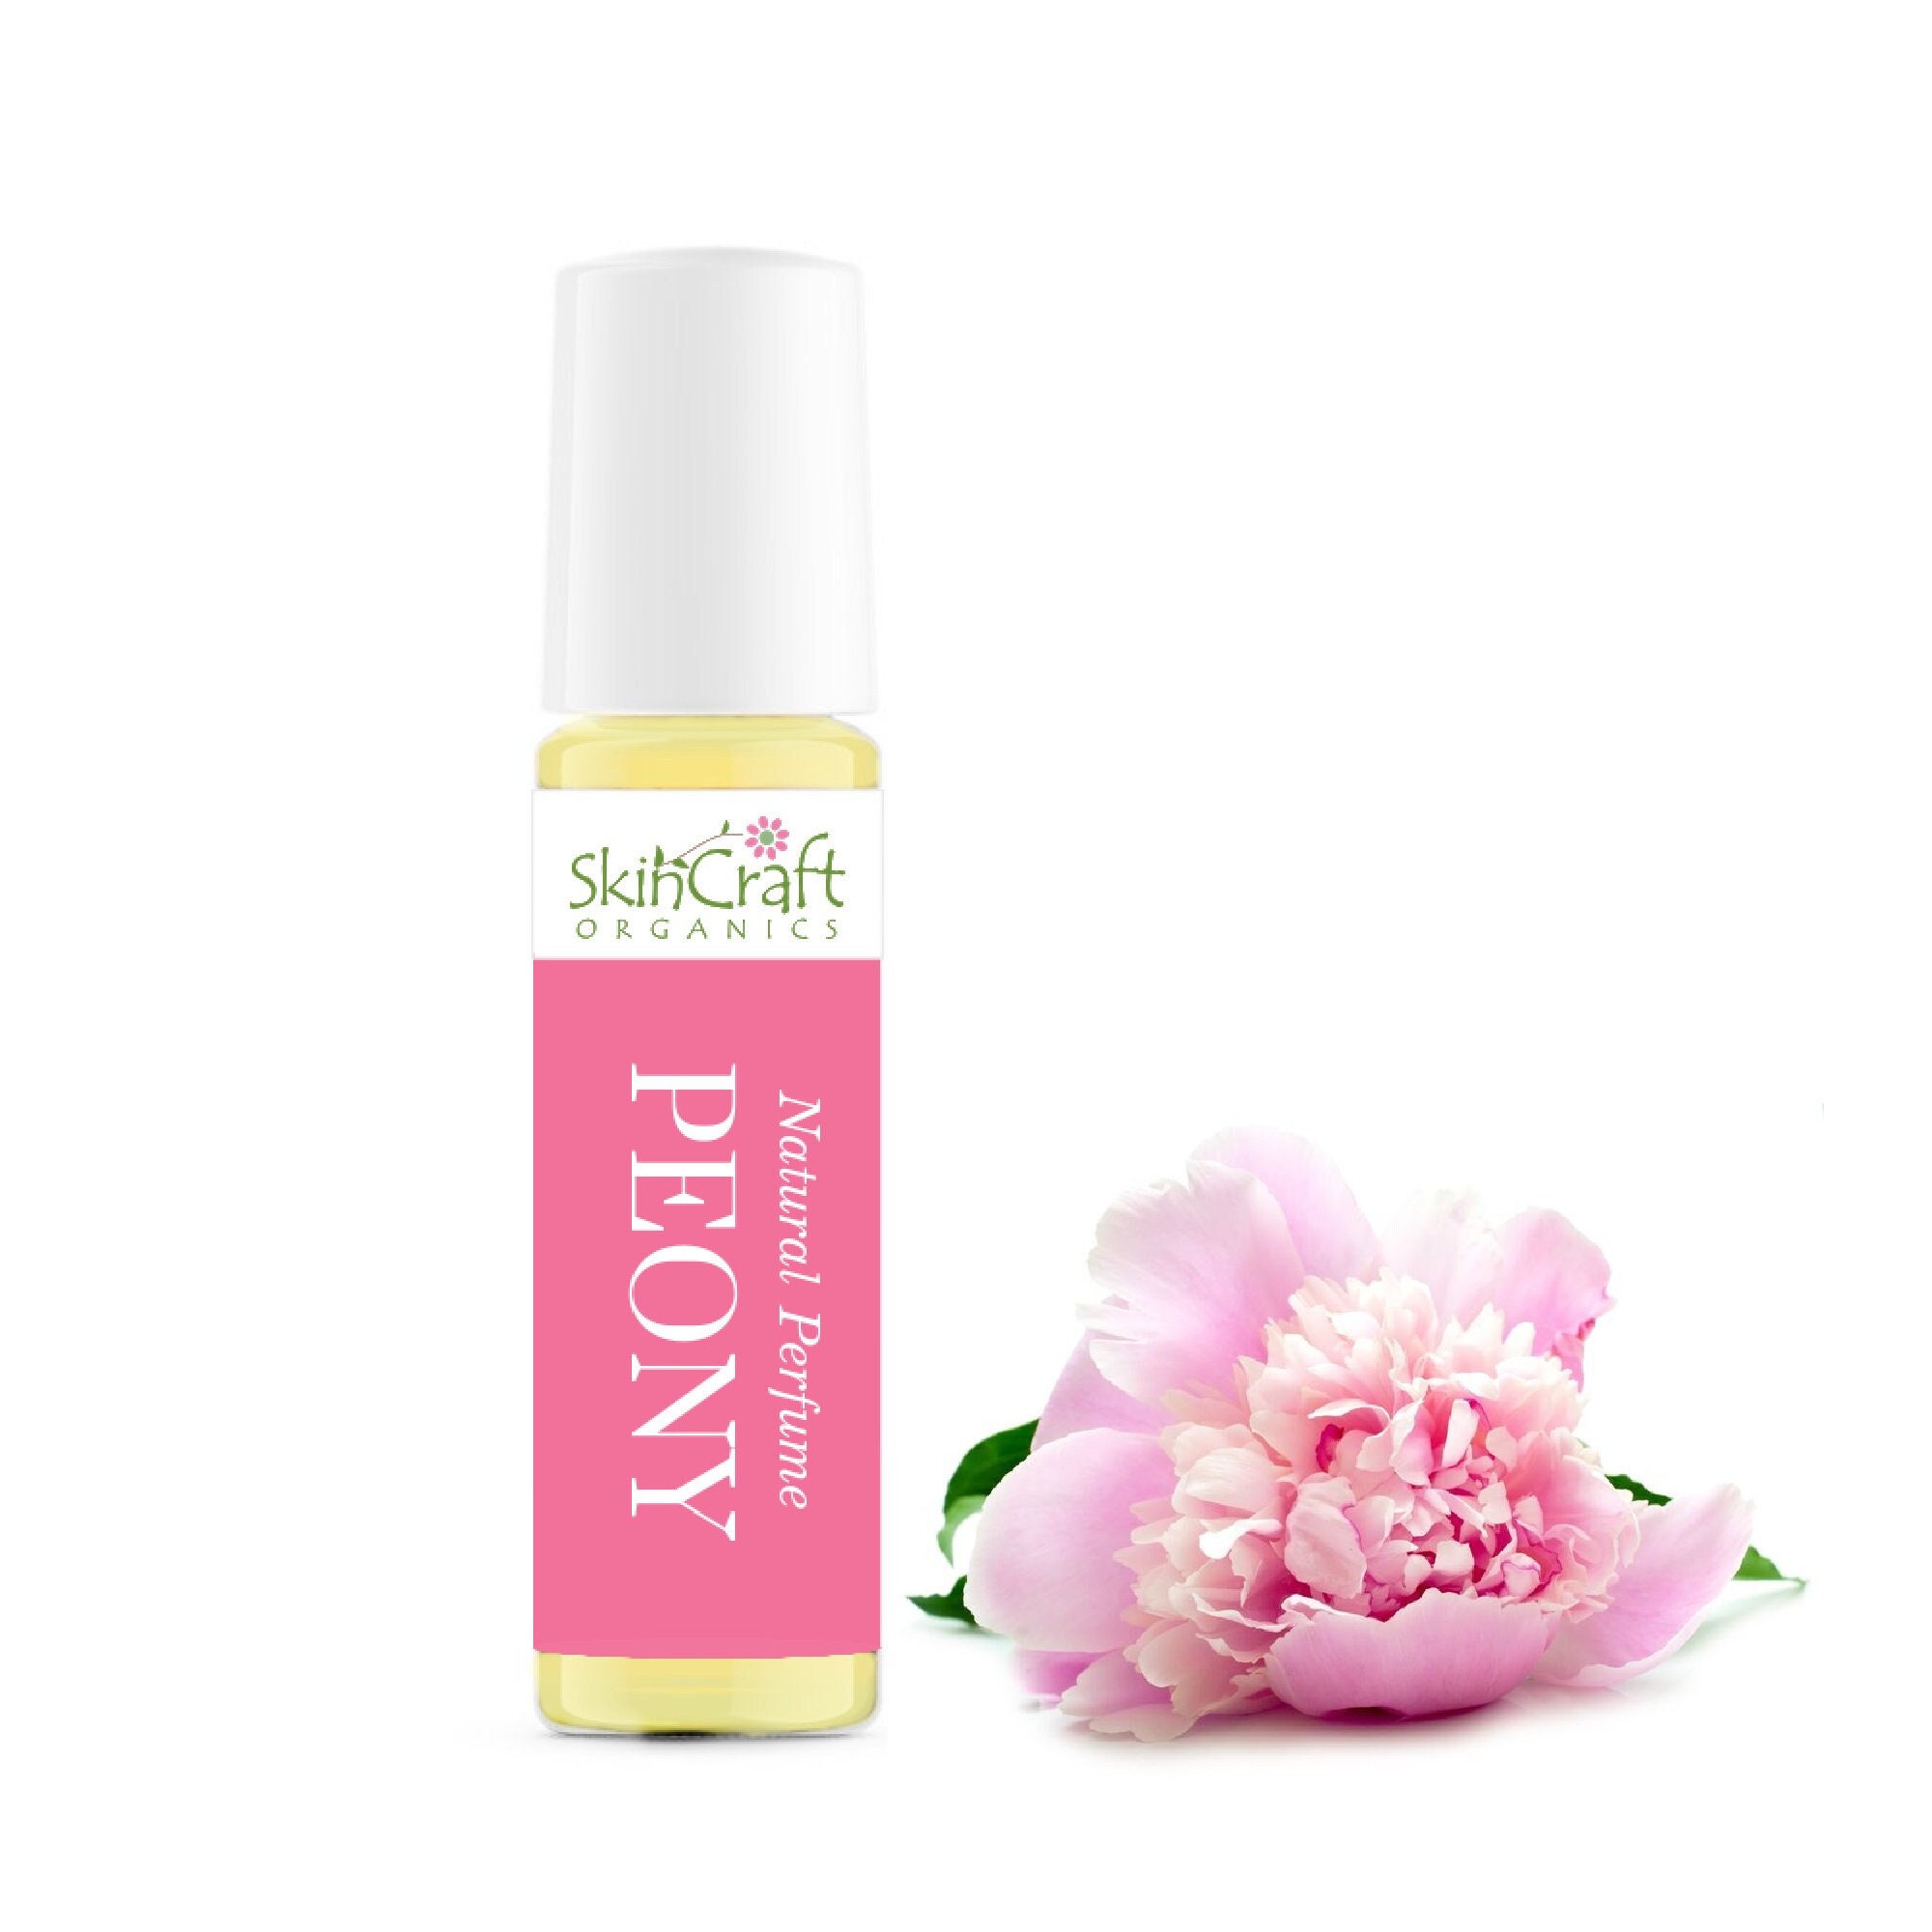 Peony Essential Oils Pure Natural Aromatherapy Massage Oil